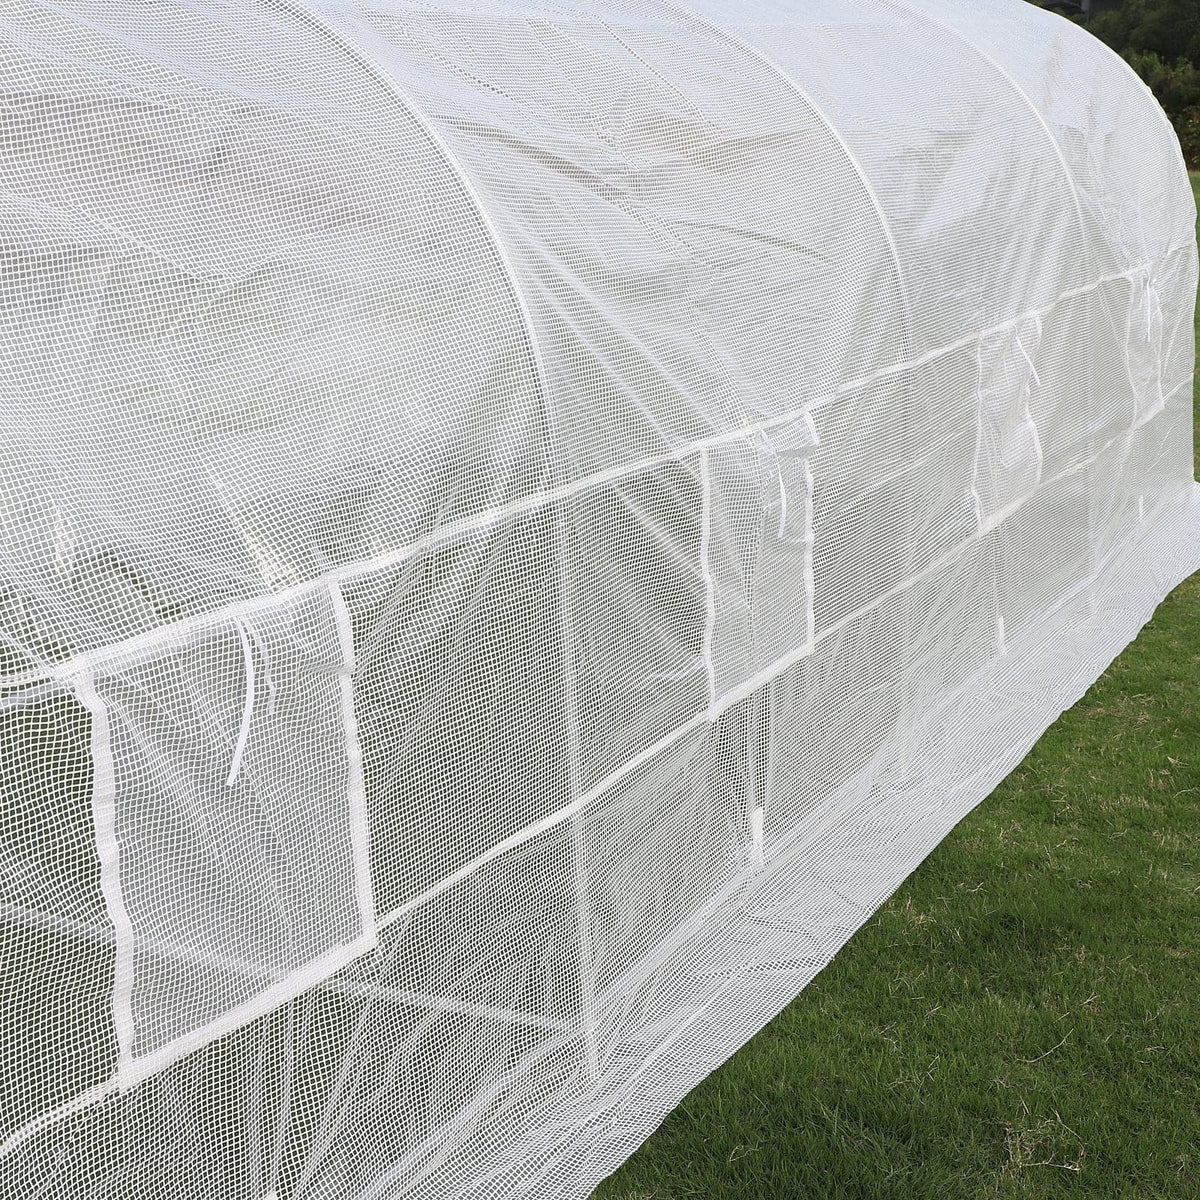 An Outsunny 20&#39; x 10&#39; x 7&#39; Deluxe High Tunnel Walk-in Garden Greenhouse Kit - White, perfect for growing plants and crops, in a grassy field.